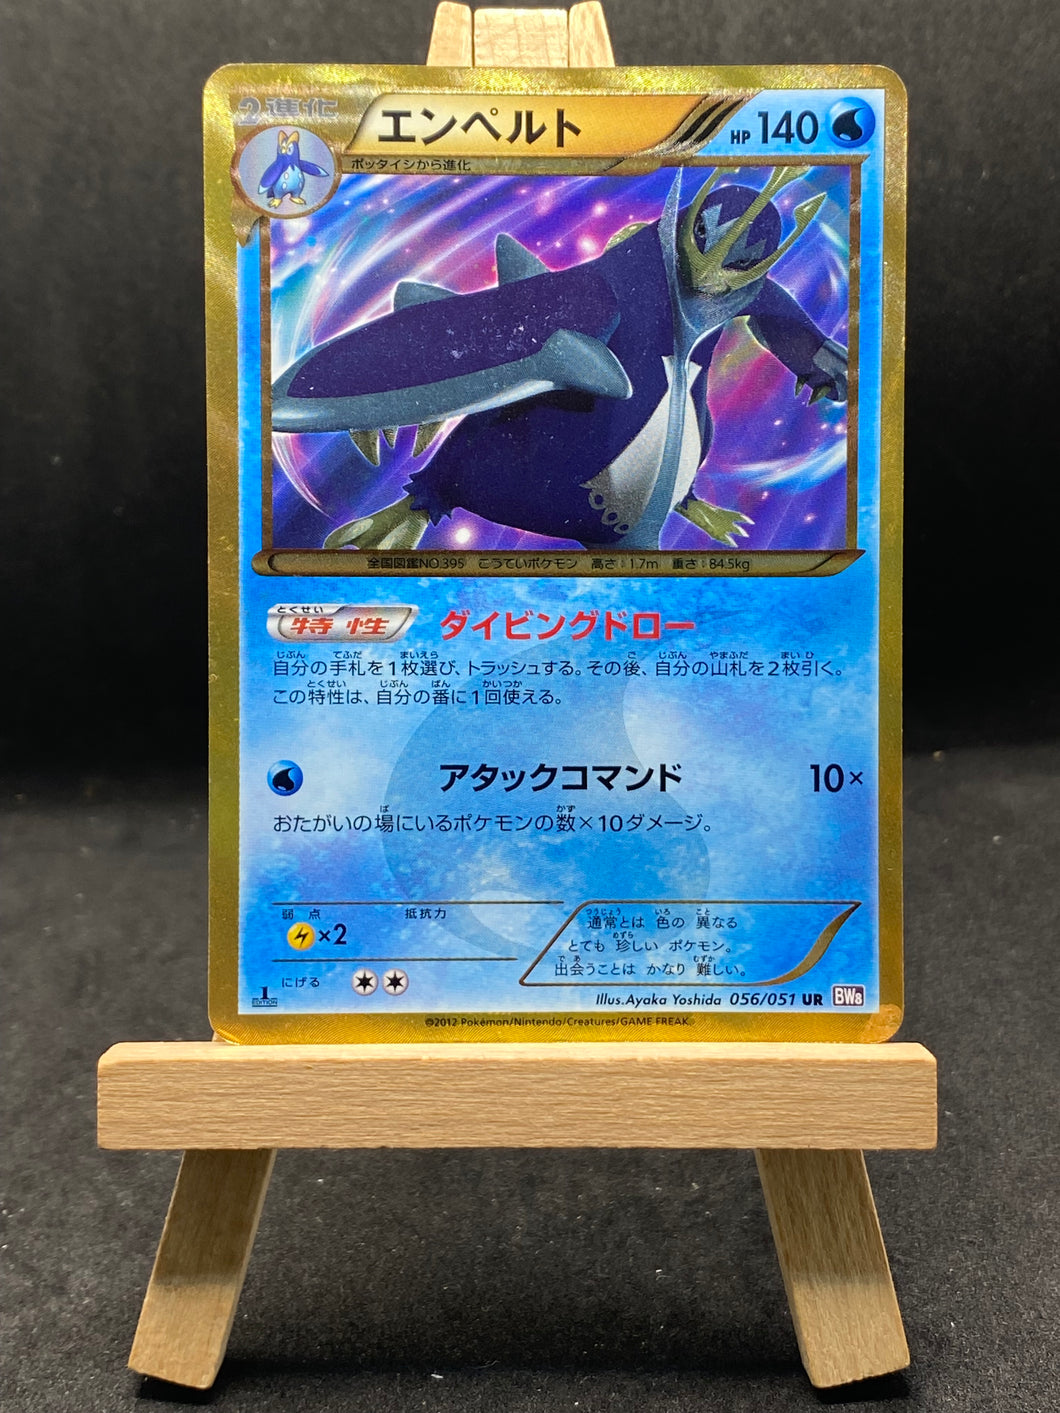 Empoleon - 056/051 - Holo - Spiral Force - Japanese - 1st edition -  [Gd]